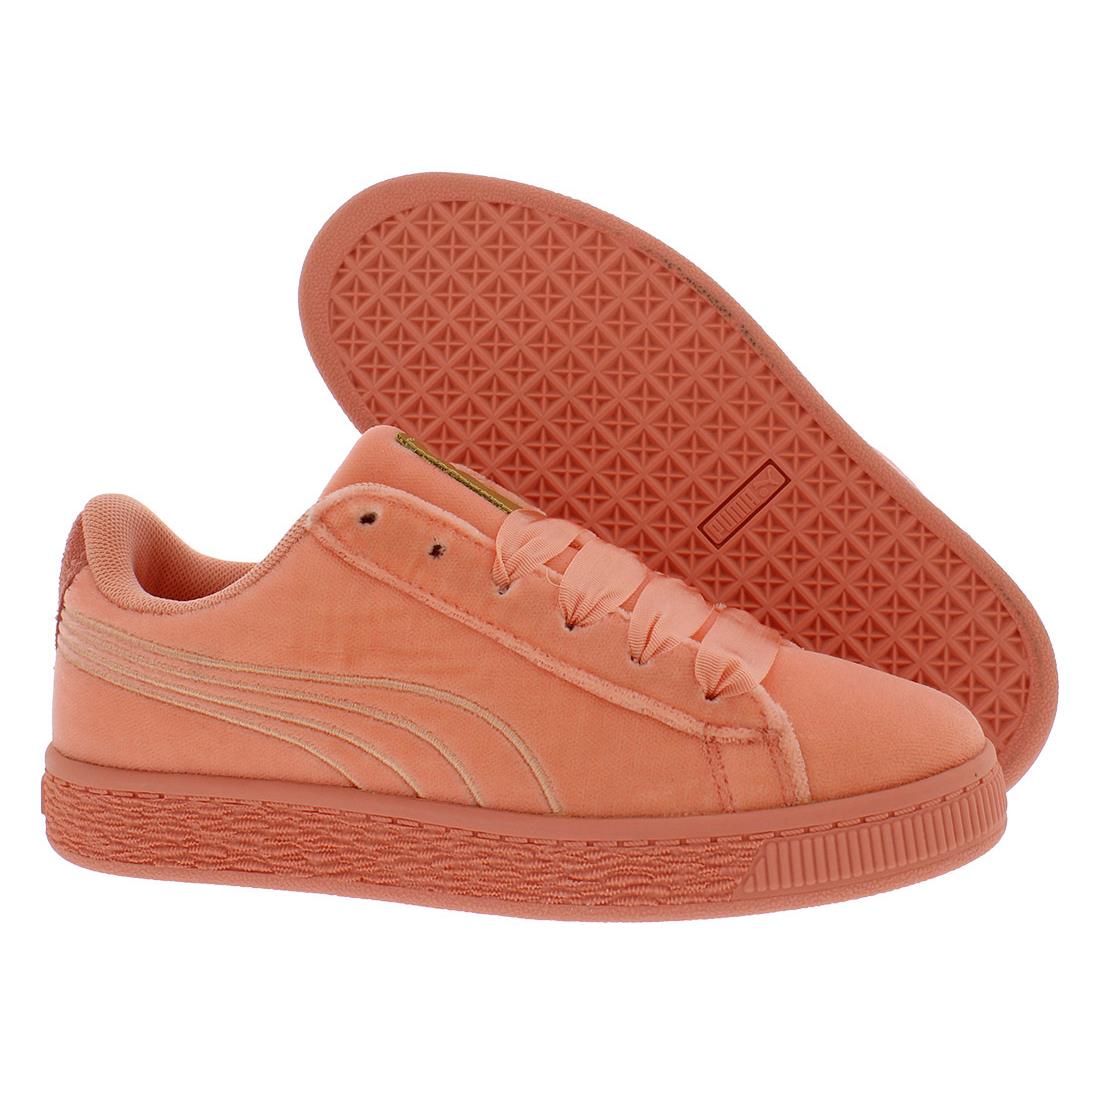 Puma Basket Classic Velour Ps Casual Boys Shoe synthetic